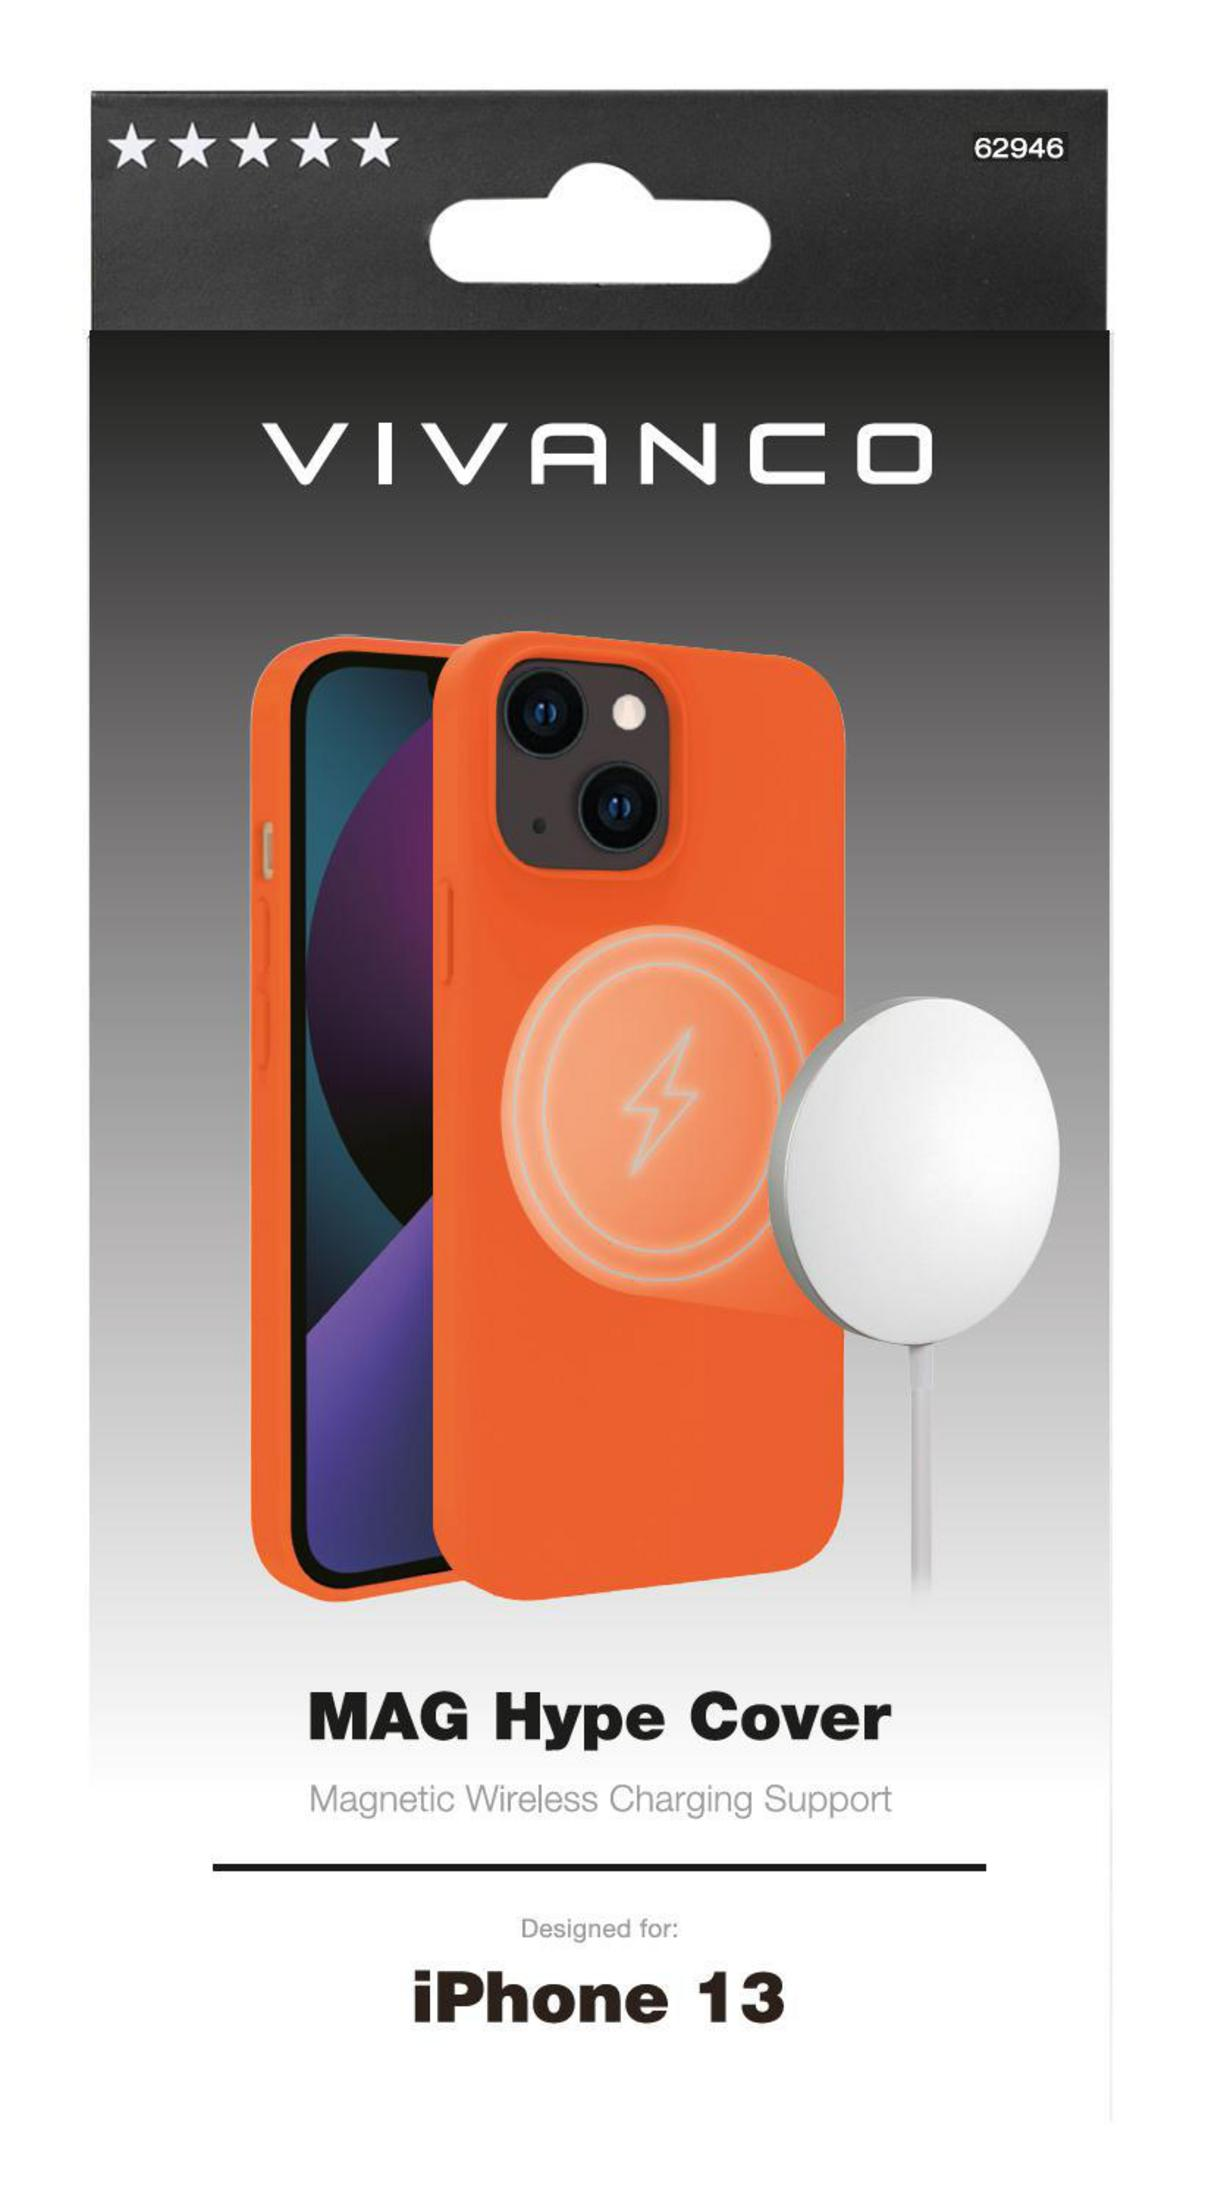 COVER iPhone Backcover, IPH13 13, MAGHYPE OR, 62946 VIVANCO Apple, Orange